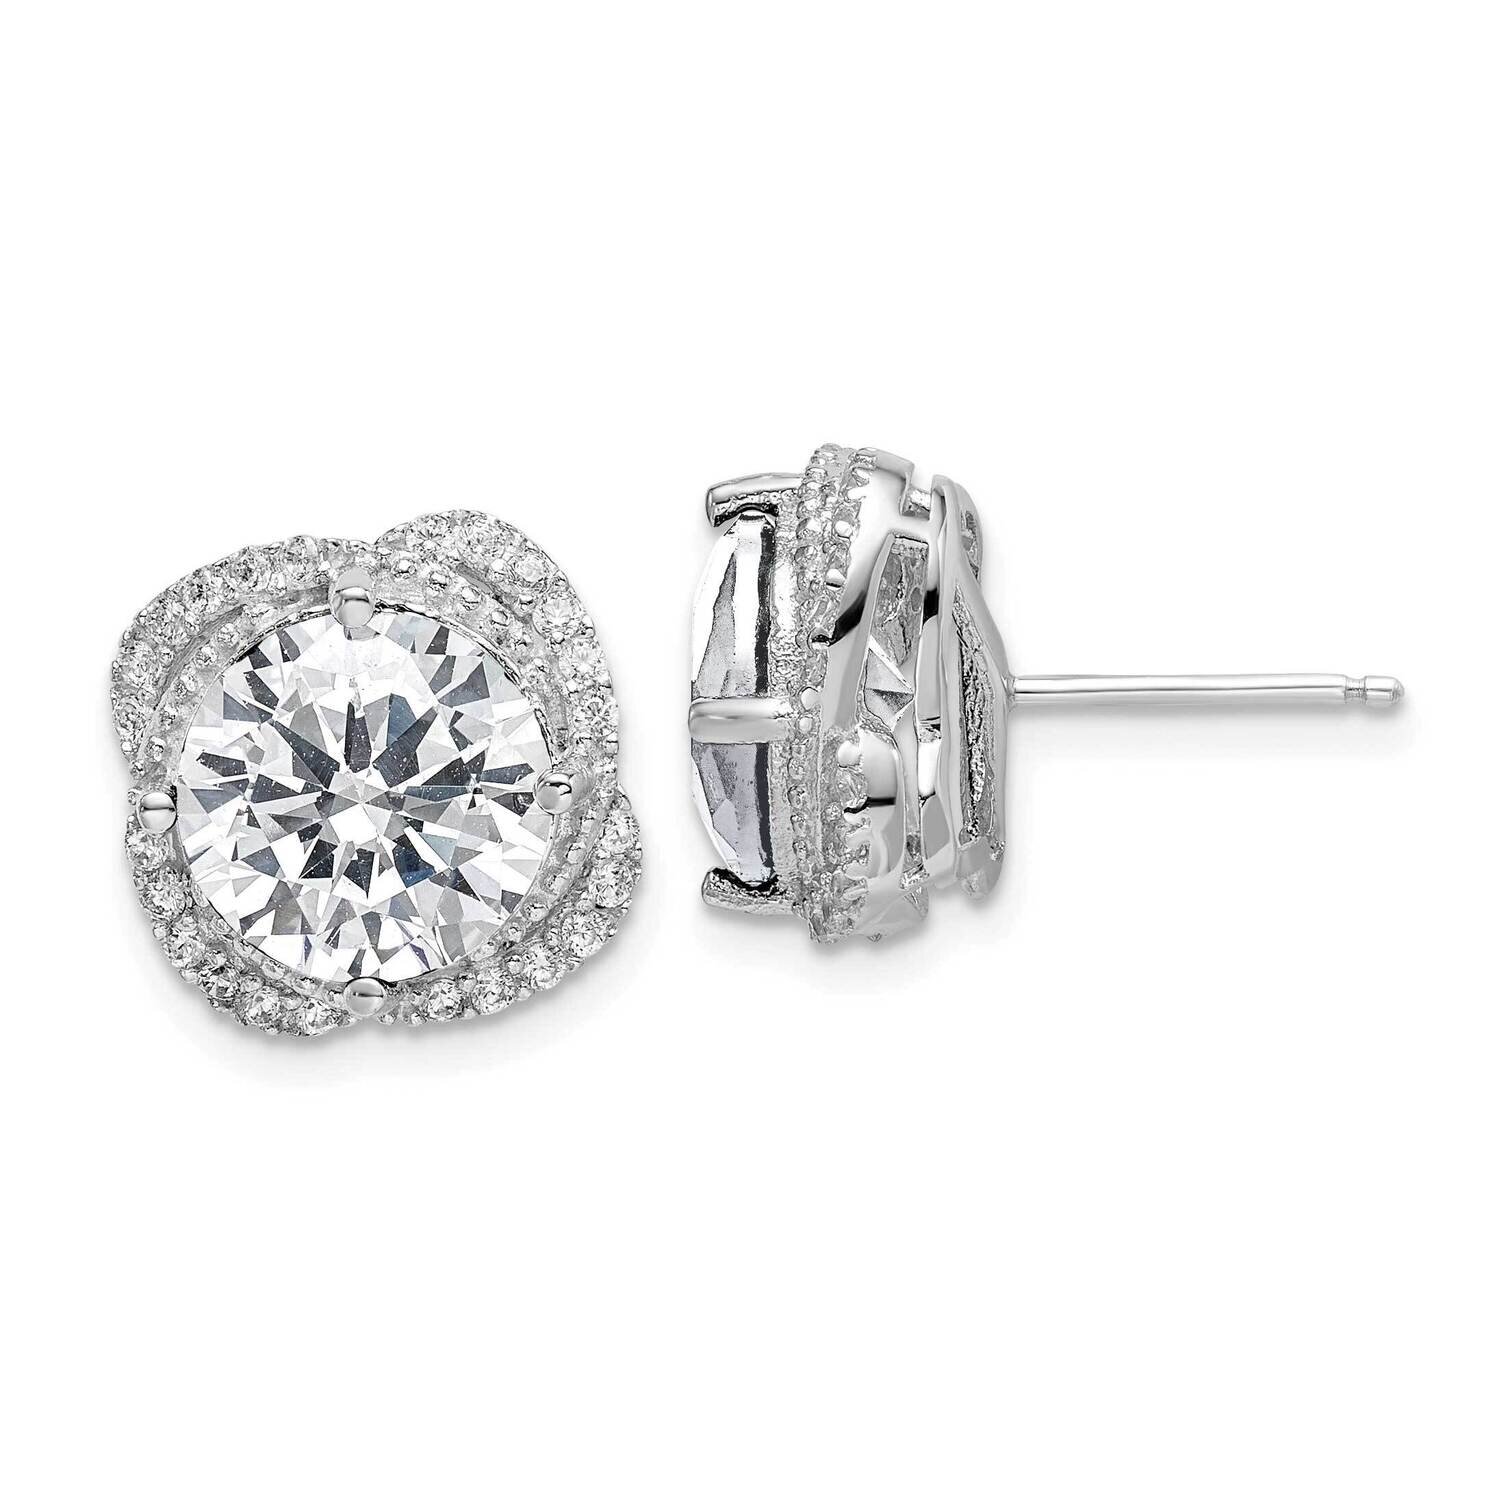 Cheryl M Ss Rhodium-Plated Round CZ Diamond with Fancy Picture Frame Post Earrings QCM1490